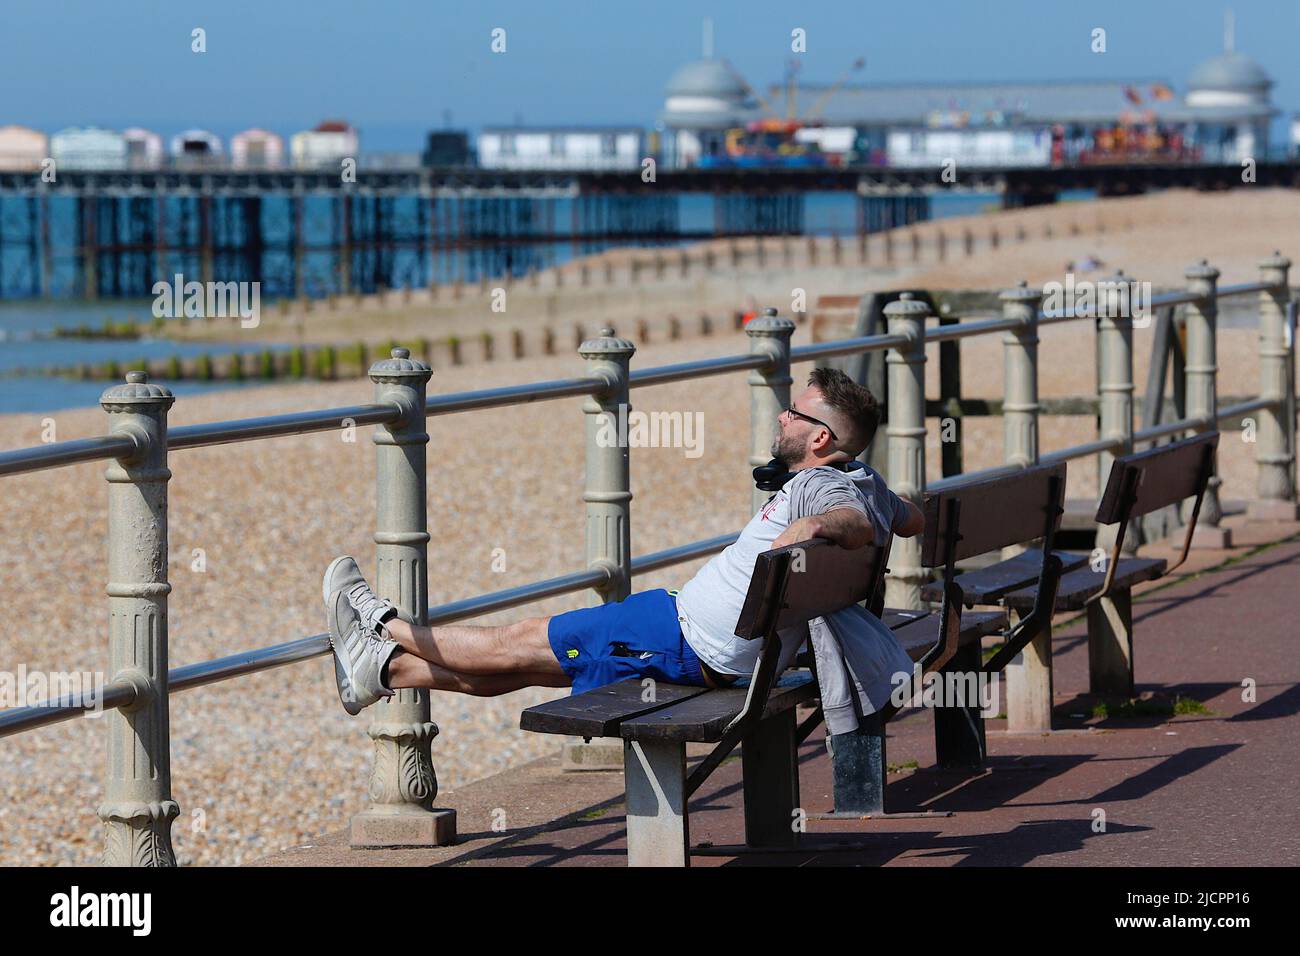 Hastings, East Sussex, UK. 15 Jun, 2022. UK Weather: Hot and sunny at the seaside town of Hastings in East Sussex as Brits enjoy the warm weather today along the seafront promenade. A man sitting on a bench enjoying the morning weather. Photo Credit: Paul Lawrenson /Alamy Live News Stock Photo